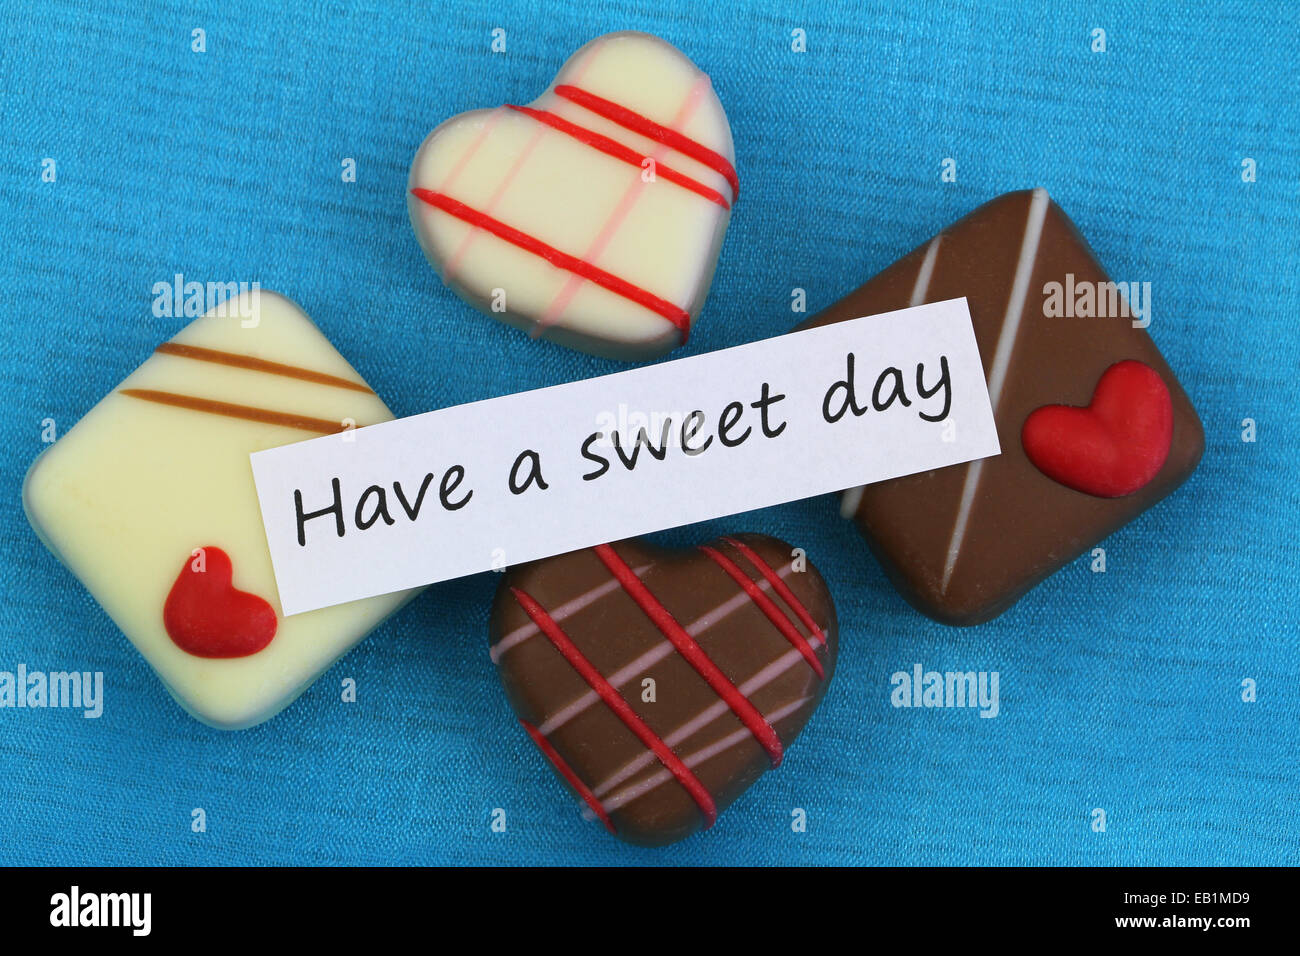 Have a sweet day card with assorted chocolates Stock Photo